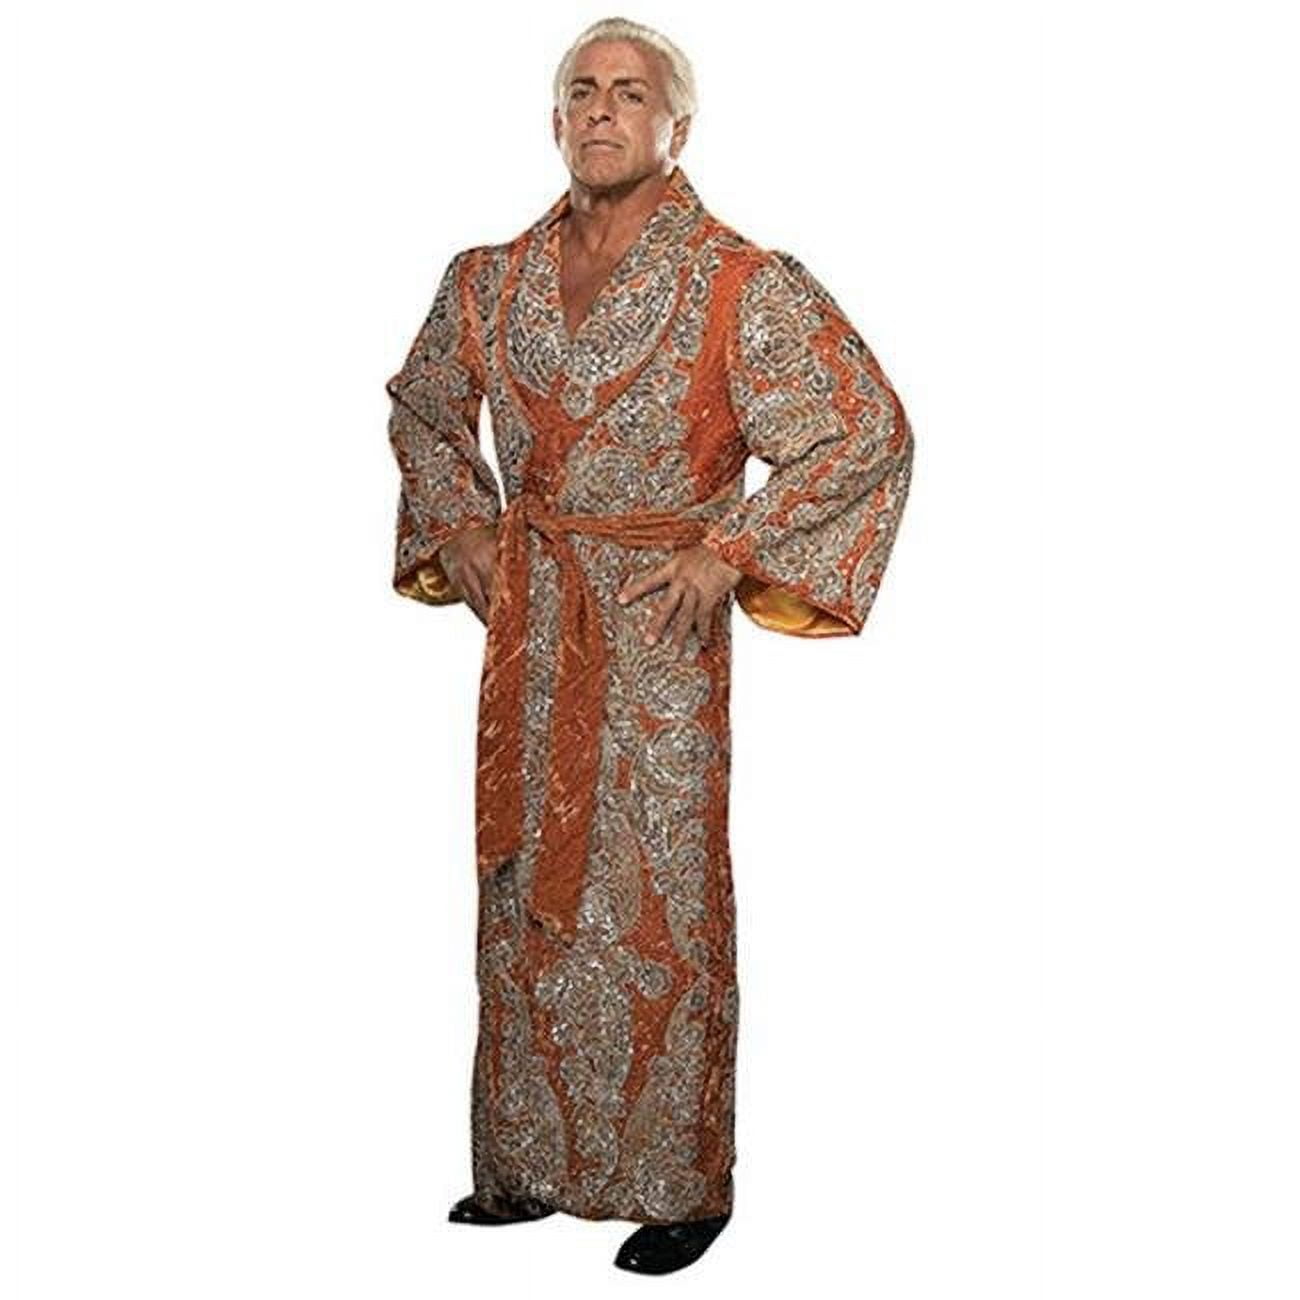 Advanced Graphics 2643 73 x 30 in. Ric Flair - WWE Wall Decal